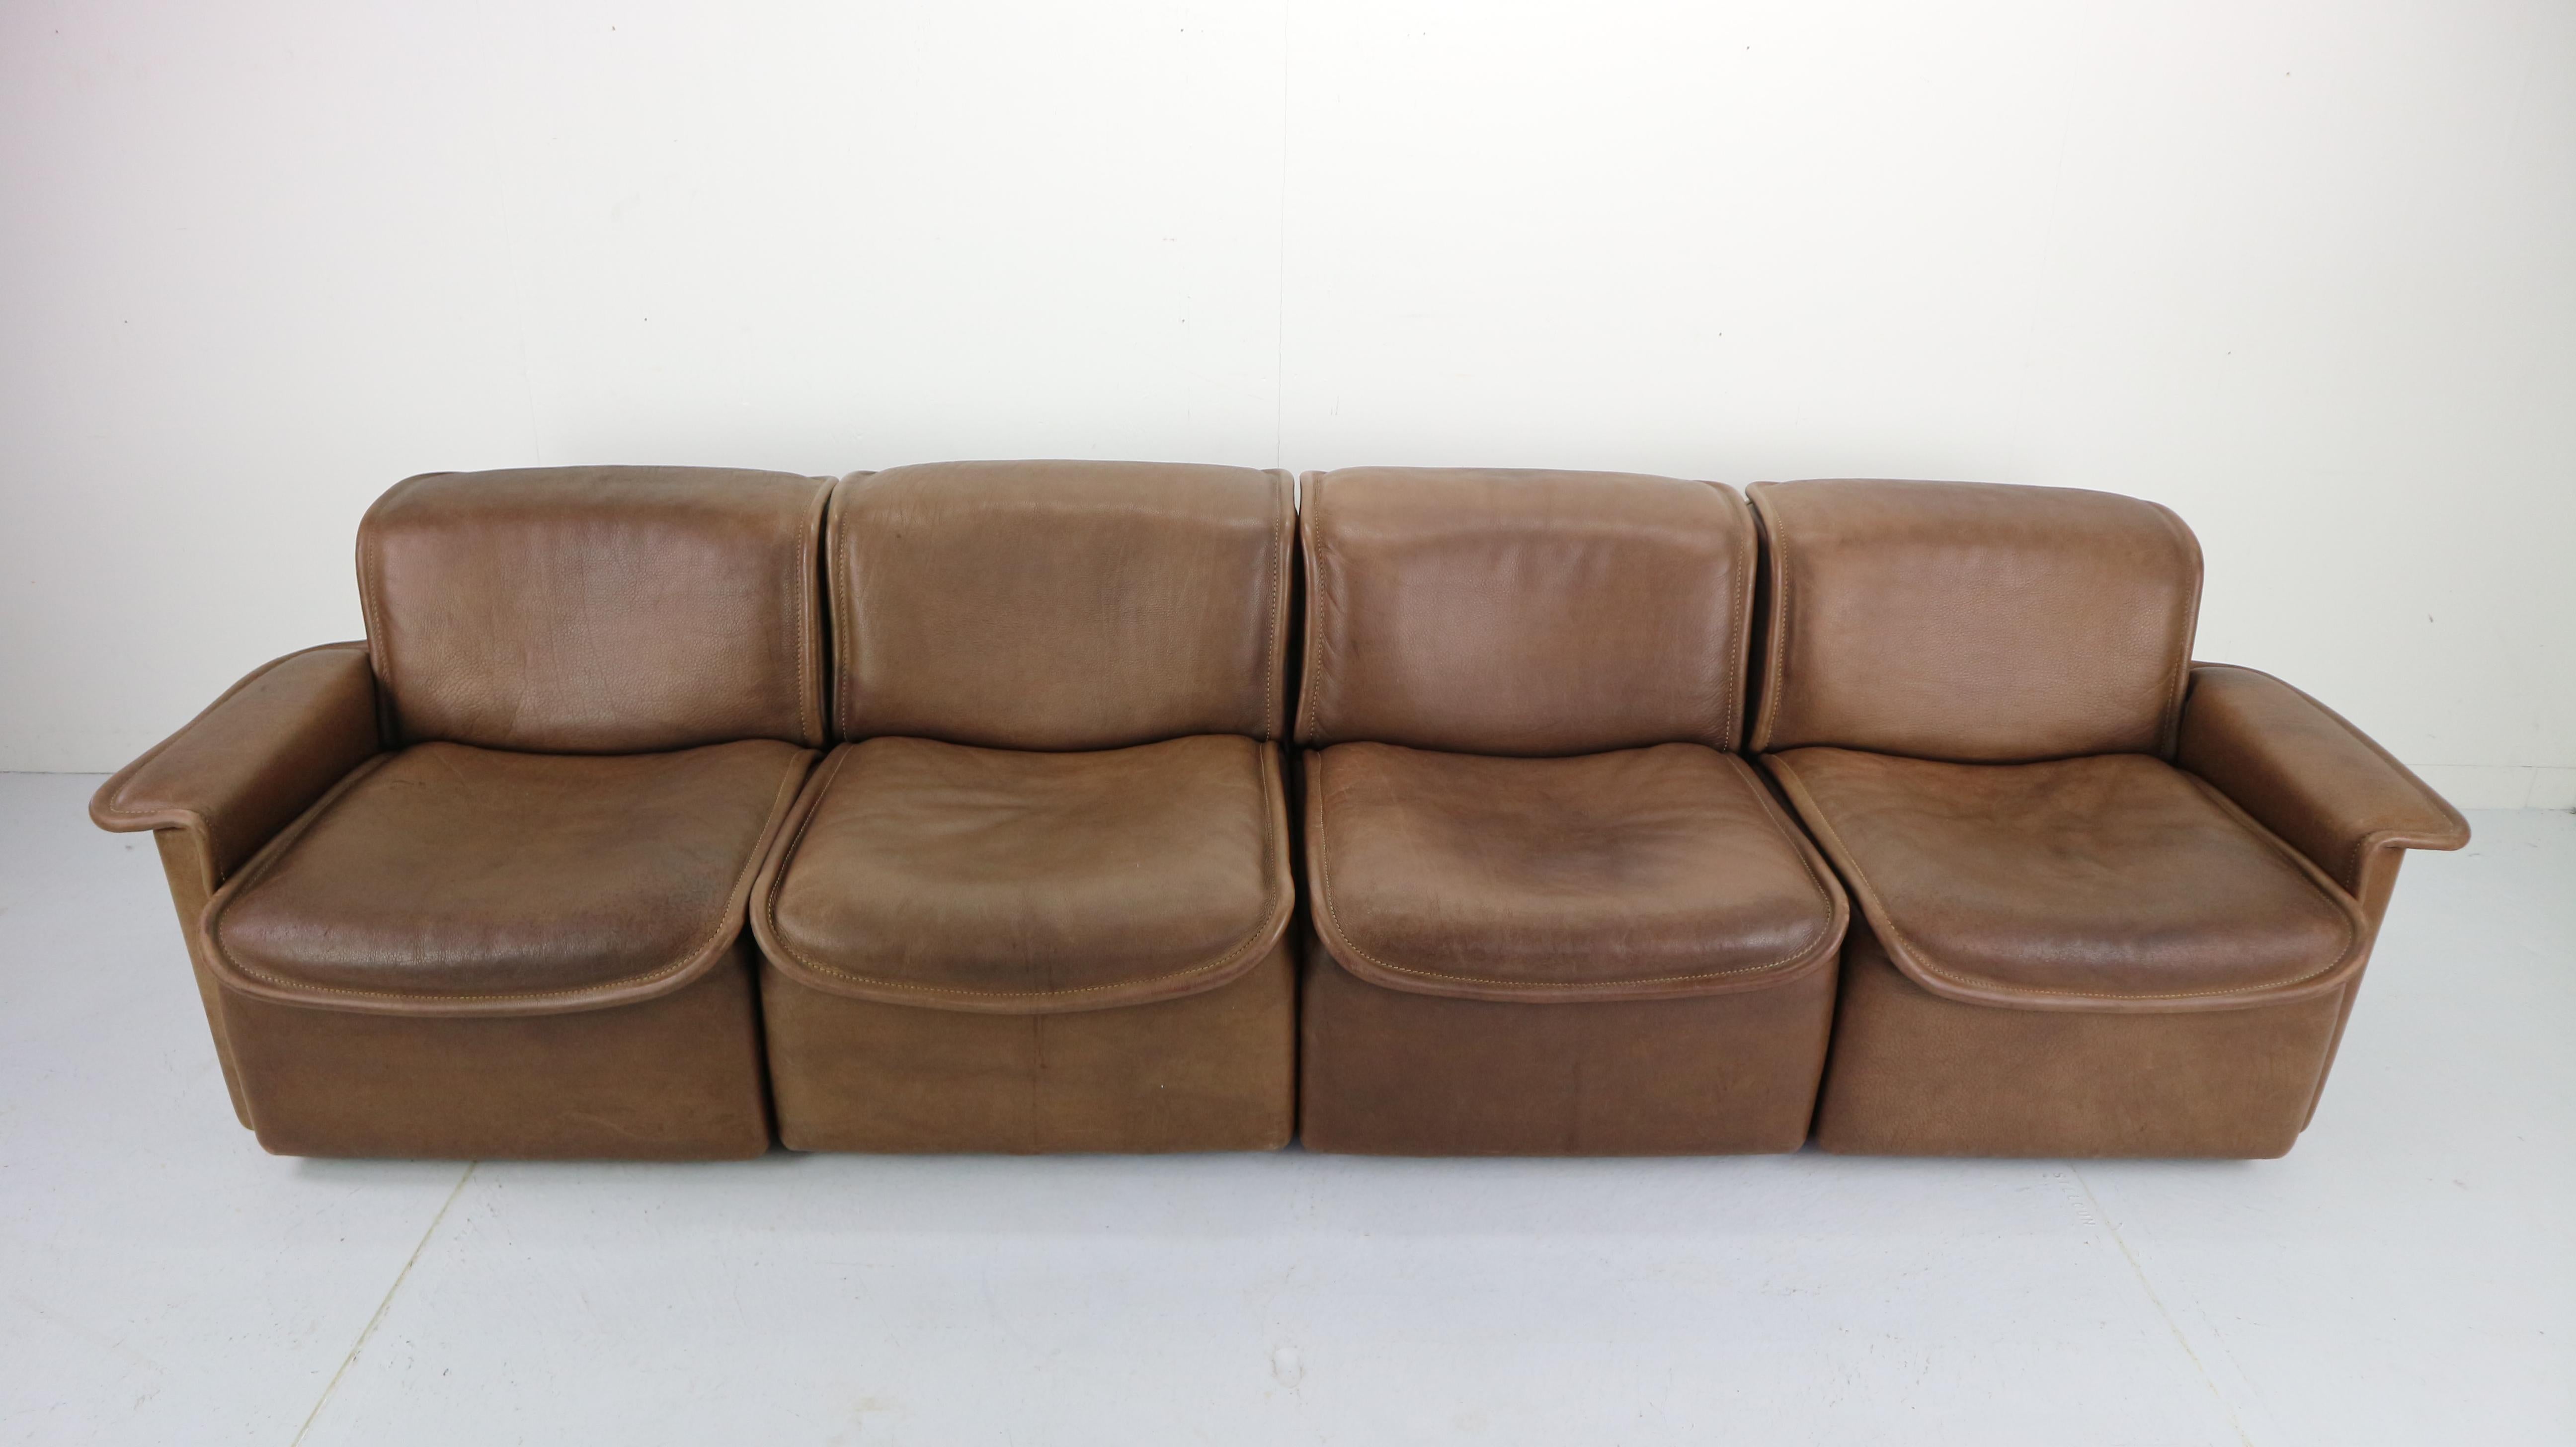 Swiss Vintage DS-12 Four-Seat Brown Leather Sofa by De Sede, Switzerland, 1970s